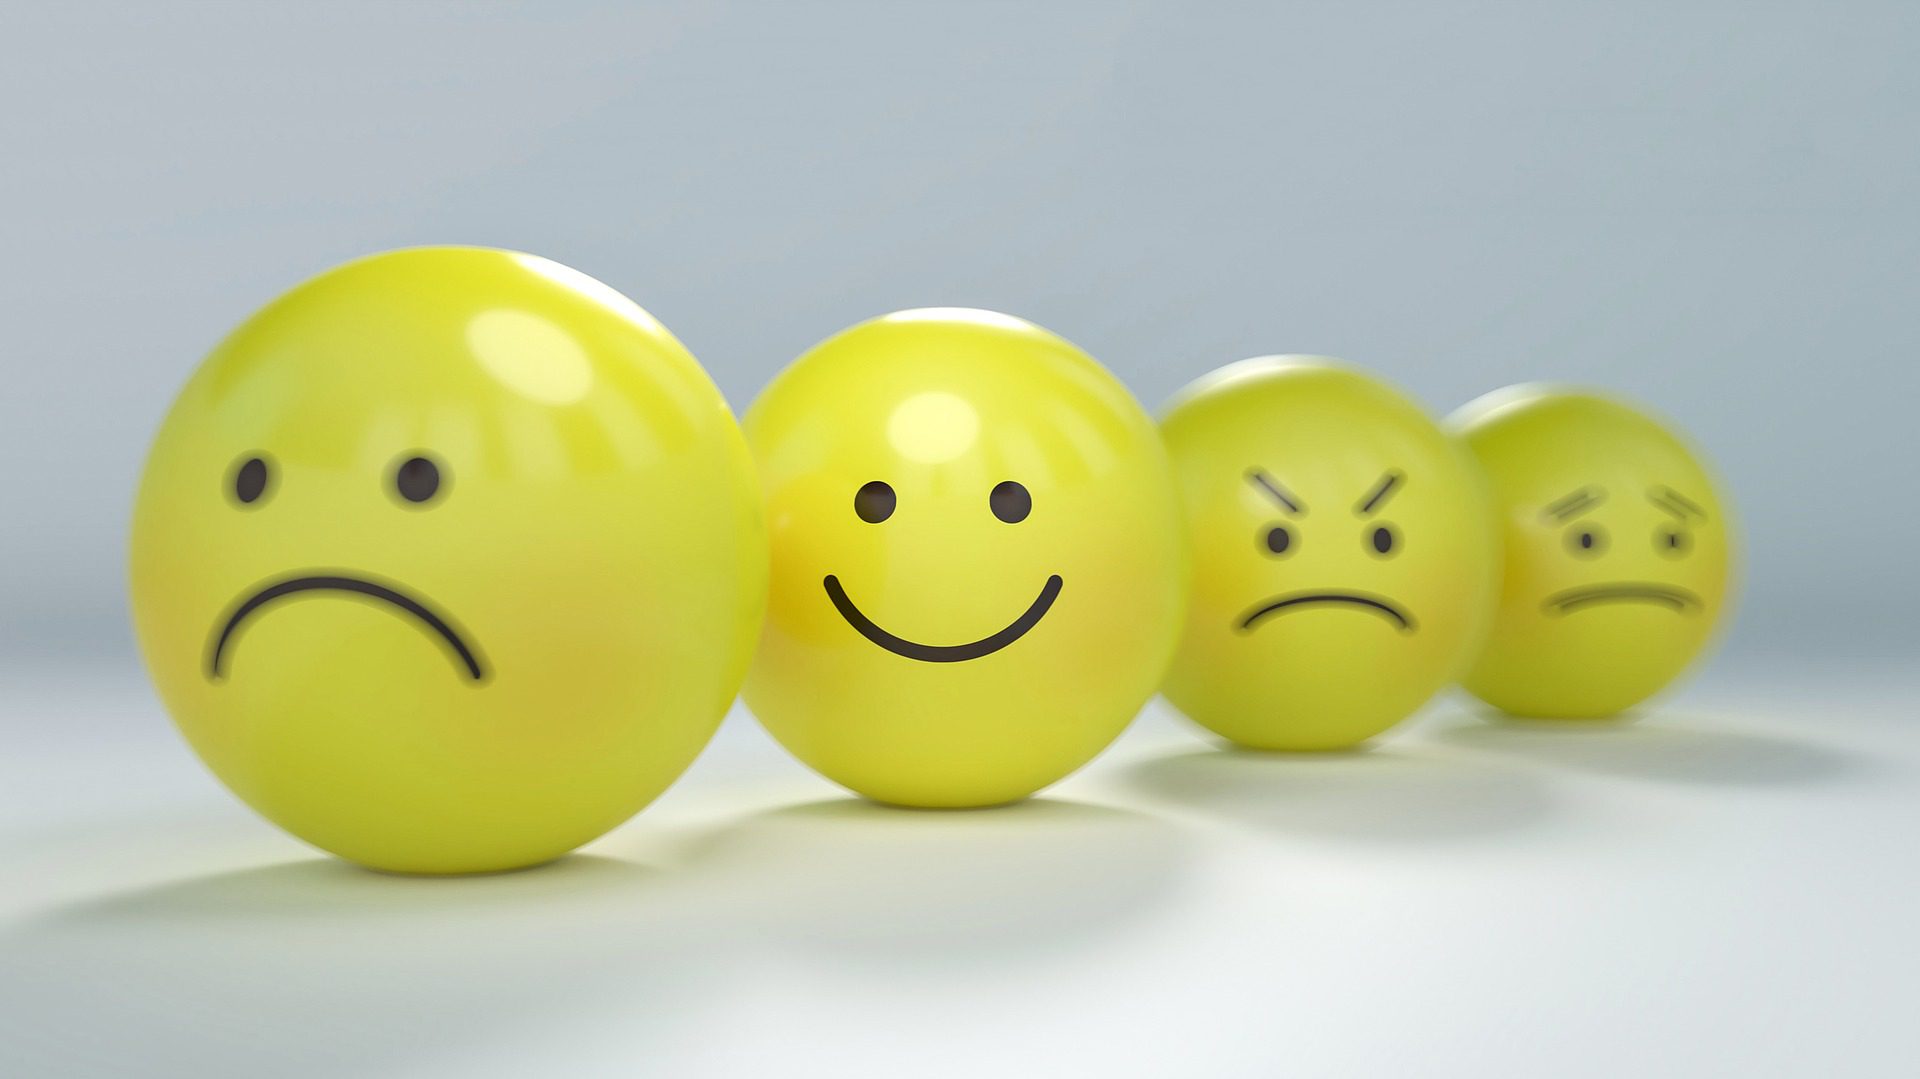 A row of yellow balls with faces drawn on them.